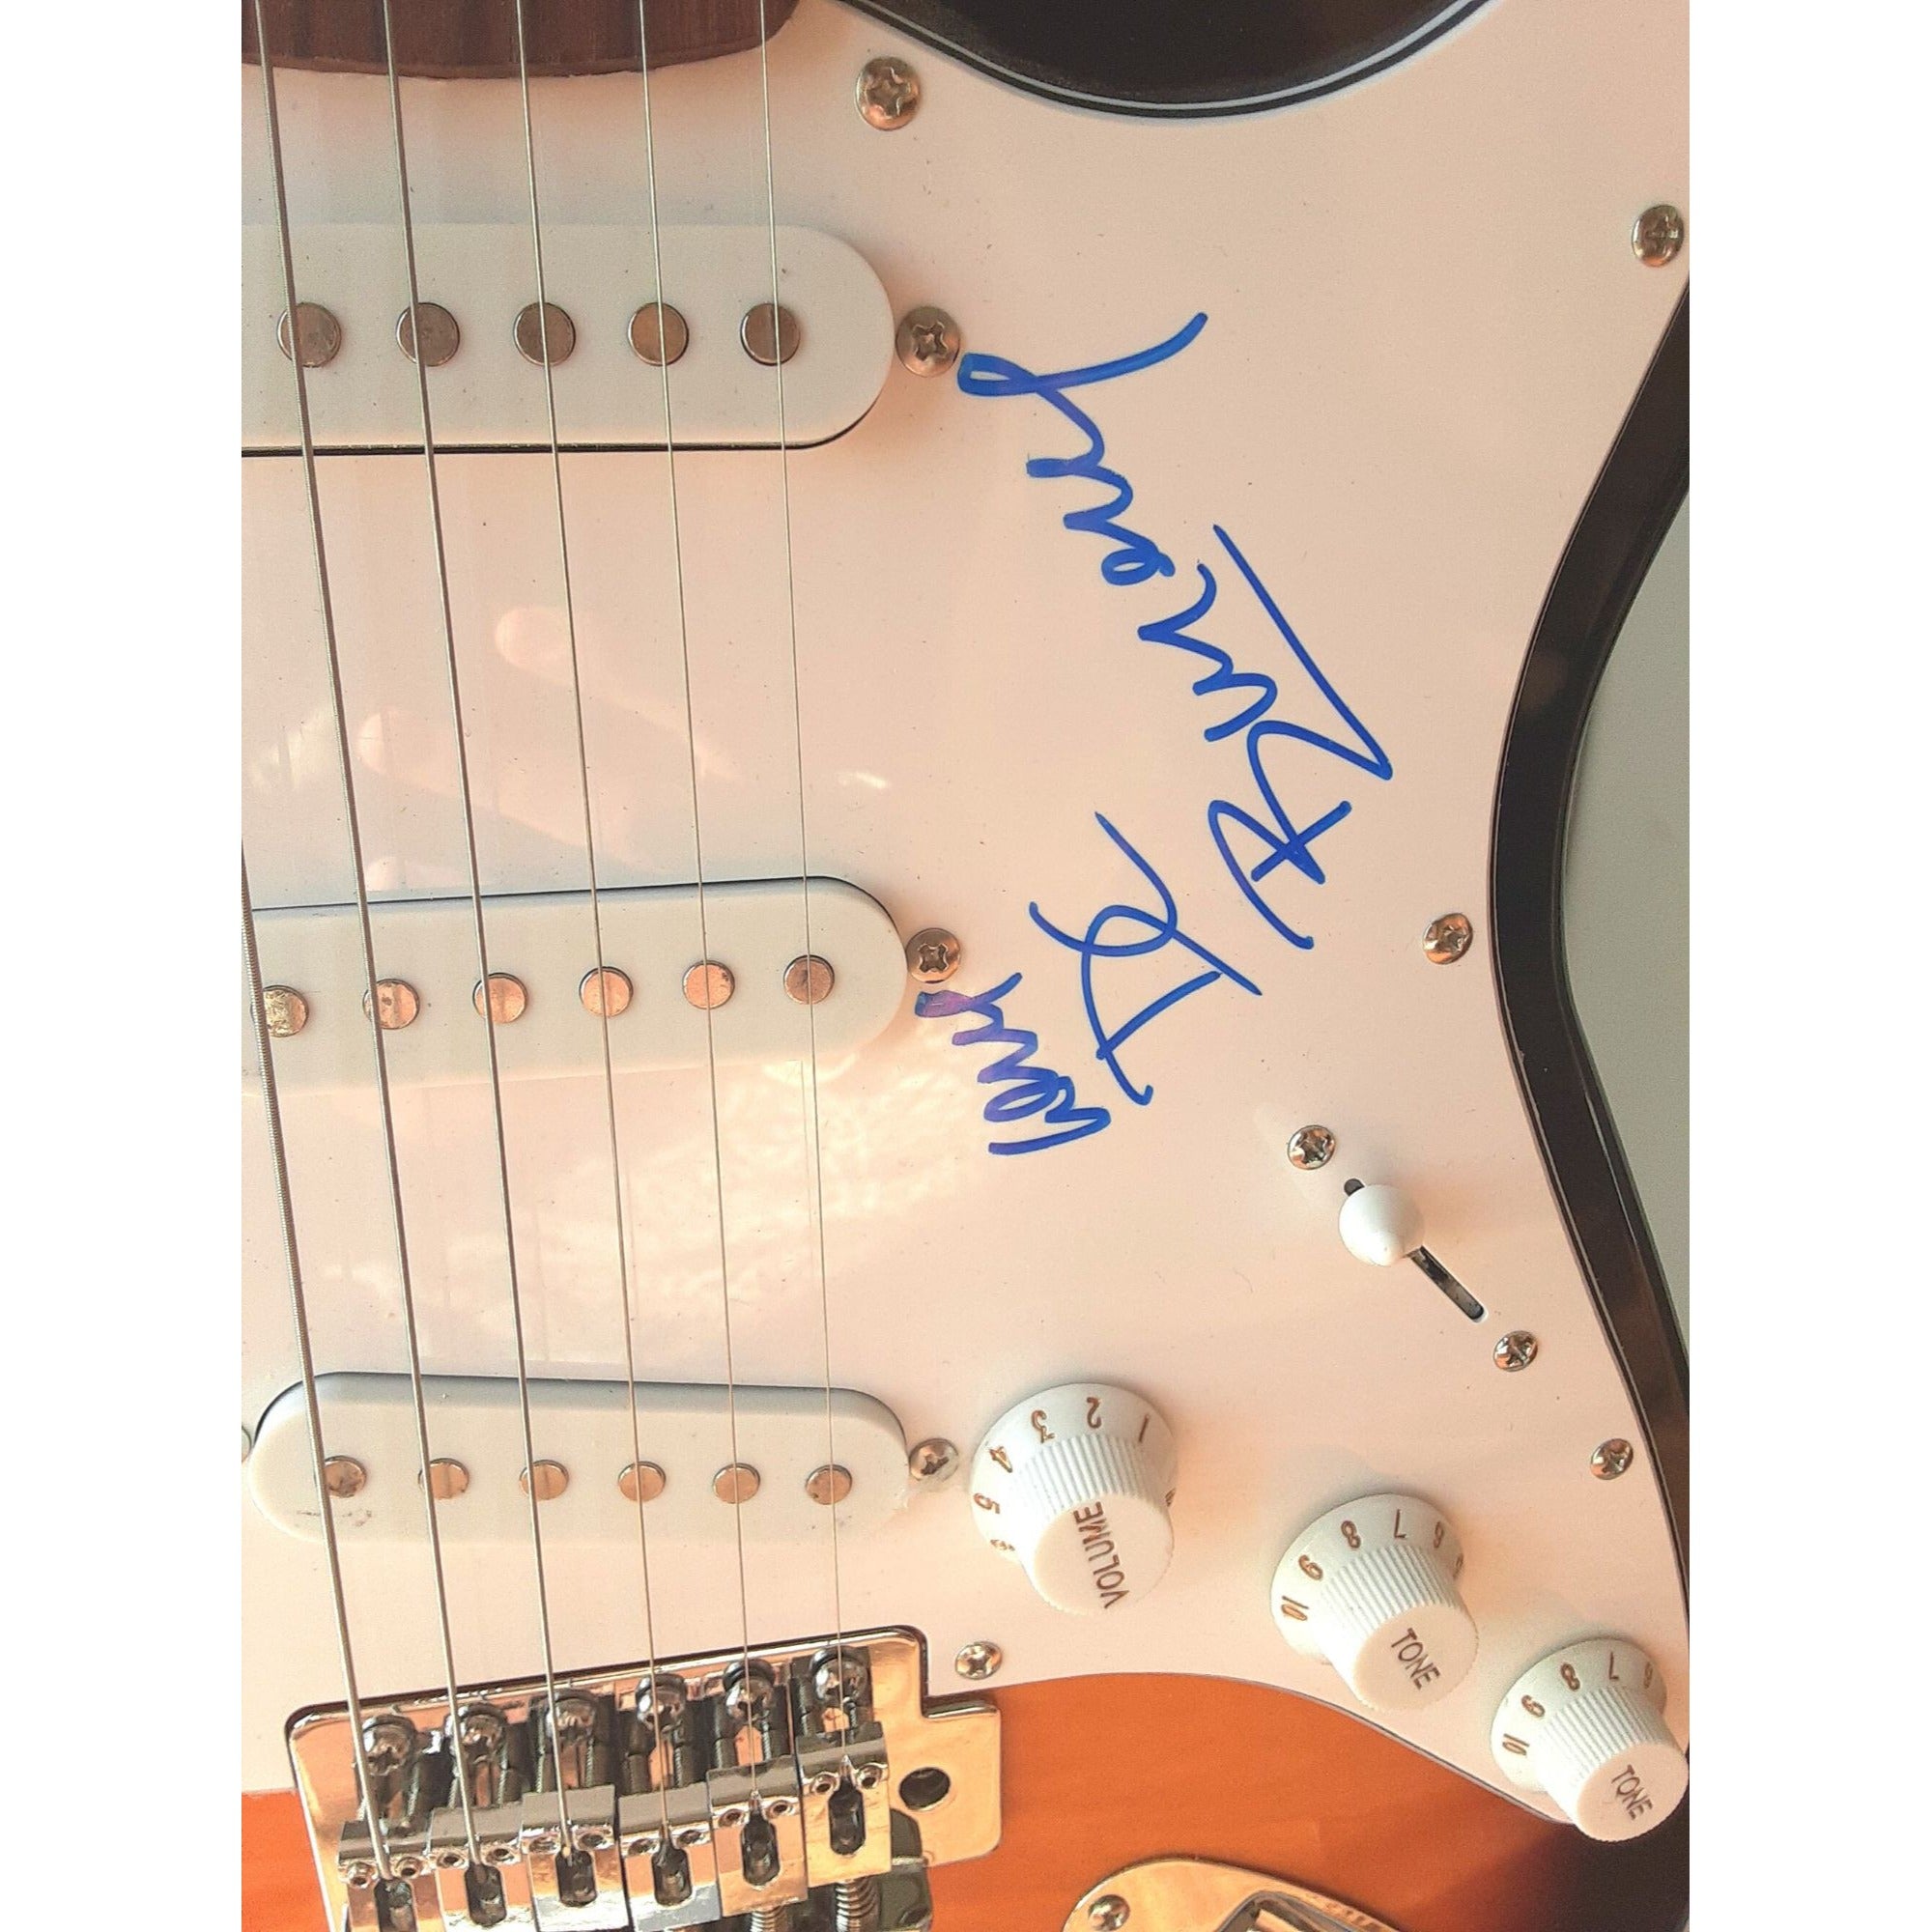 Beyonce Knowles Kelly Rowland Destinys Child signed guitar with proof